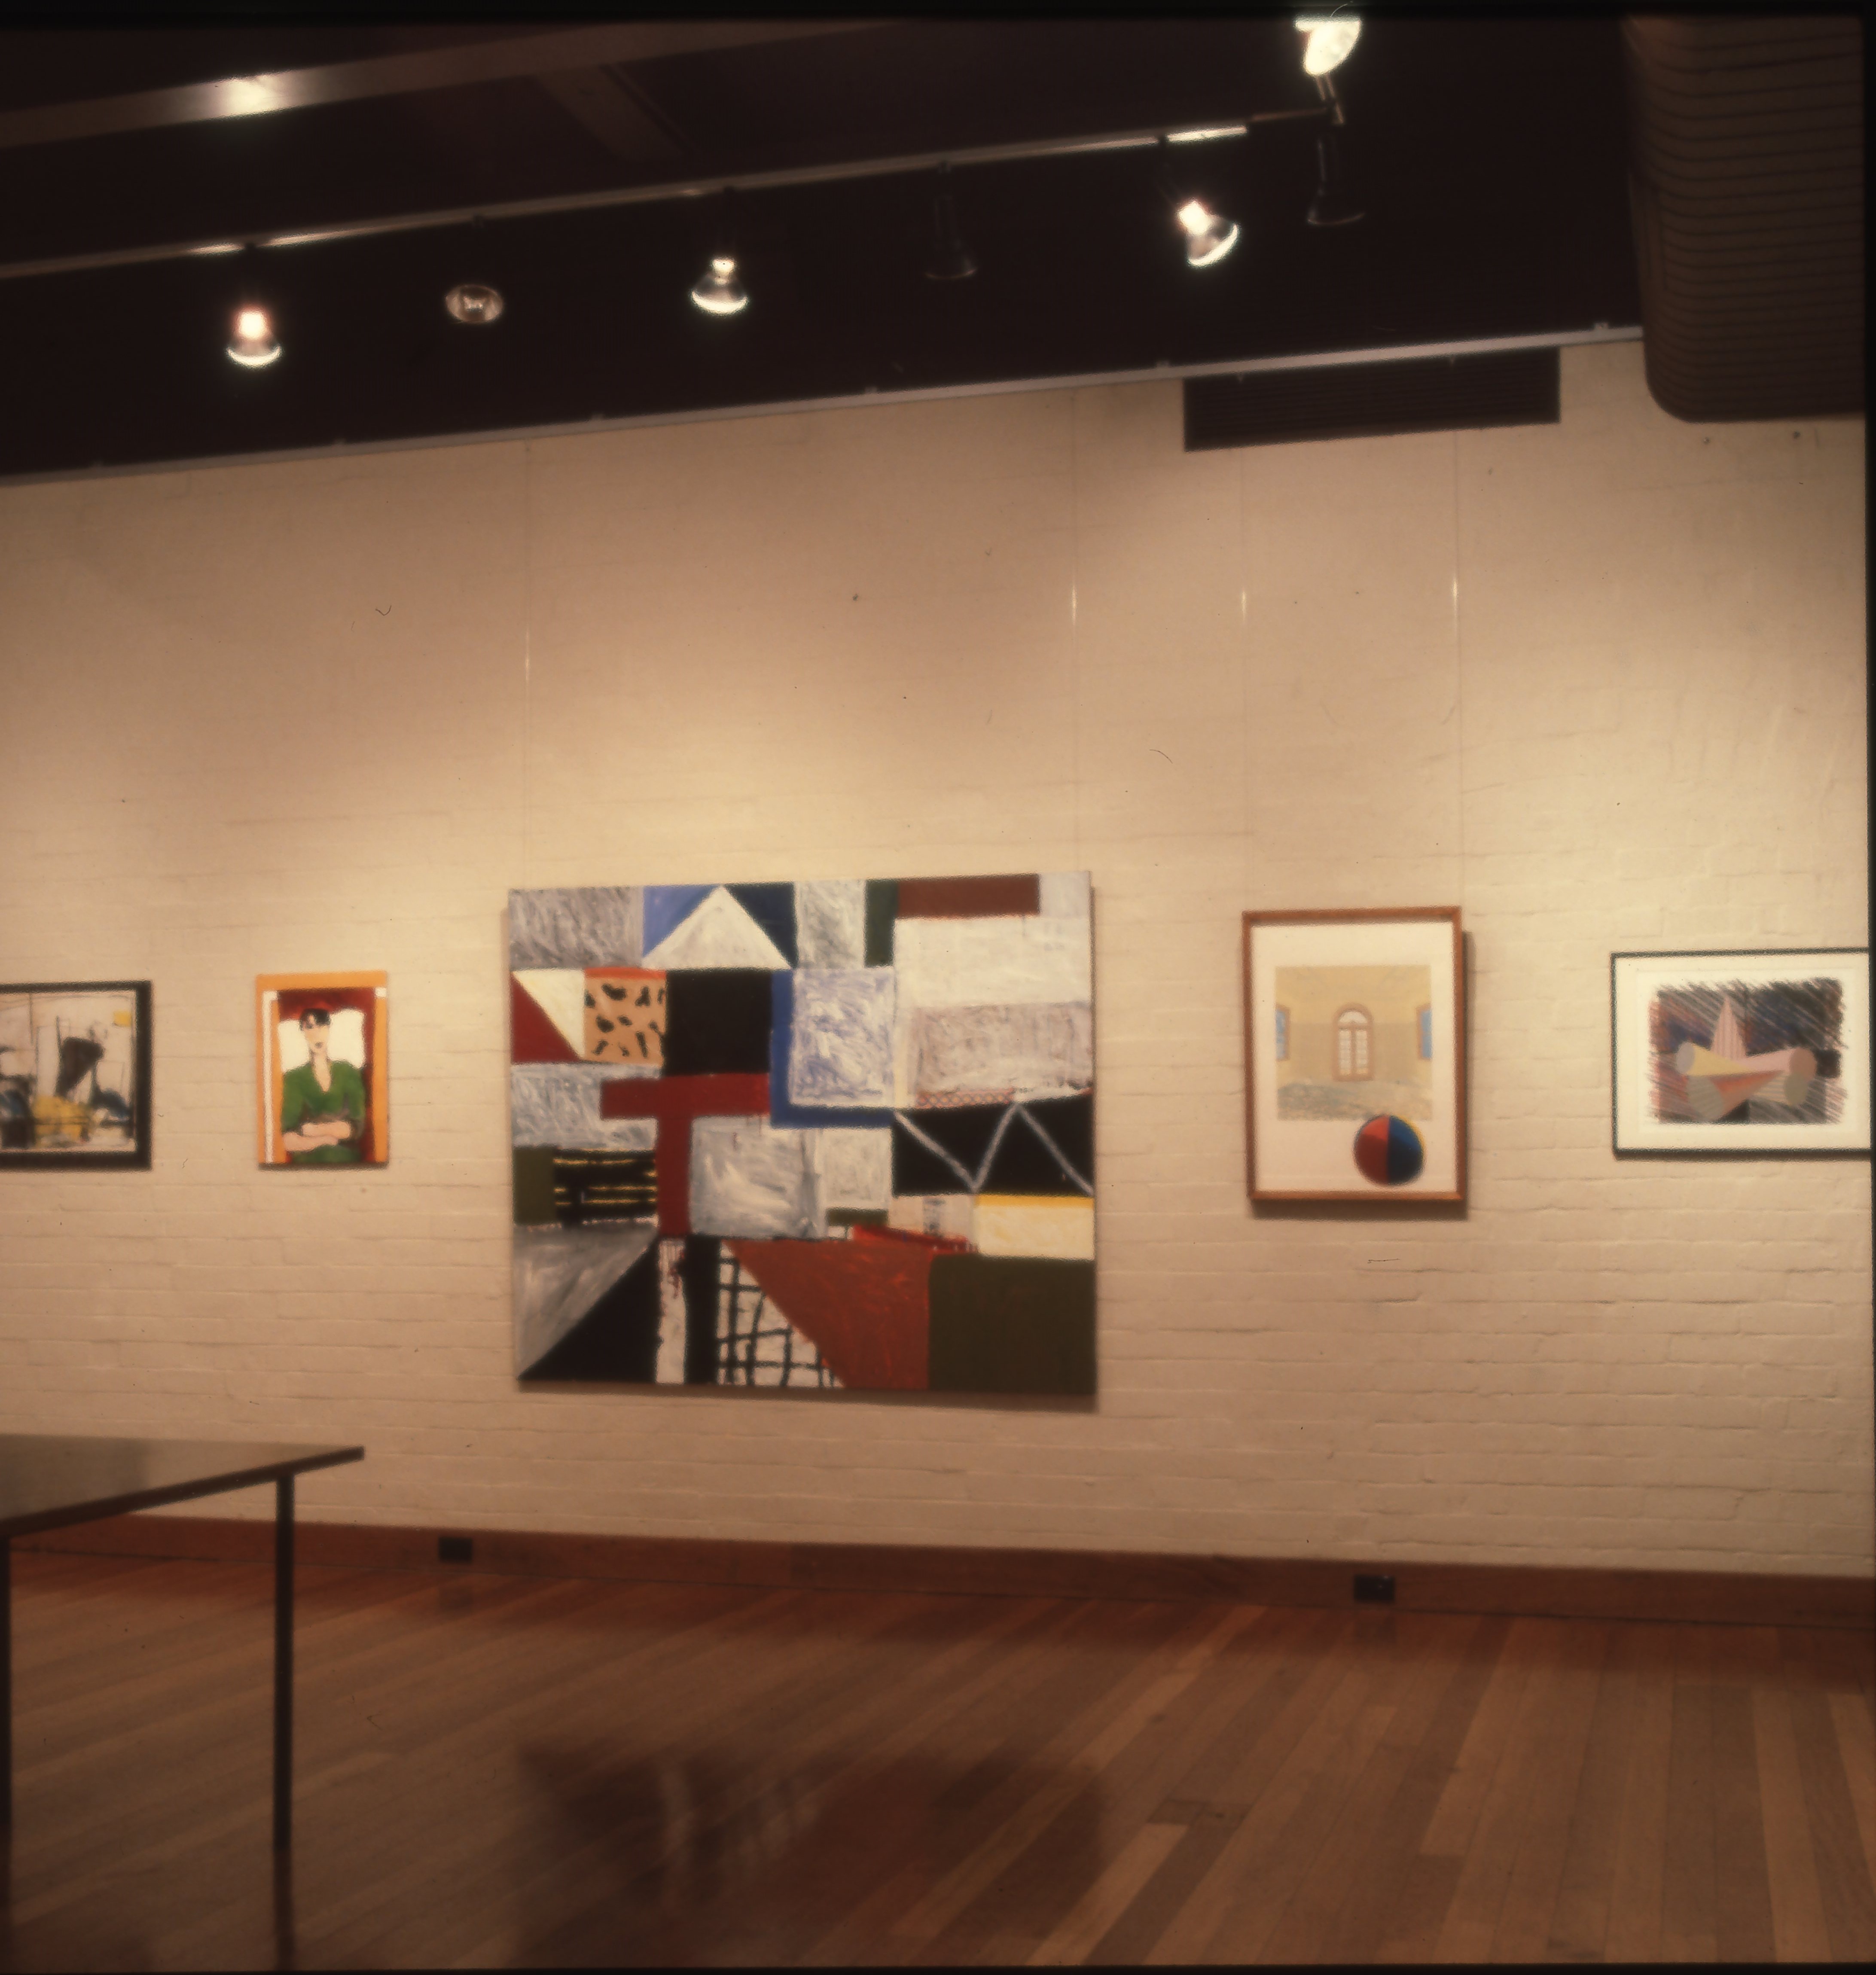 idg_archive_1982_the_first_annual_mitchell_cotts_art_award_002_install.jpg